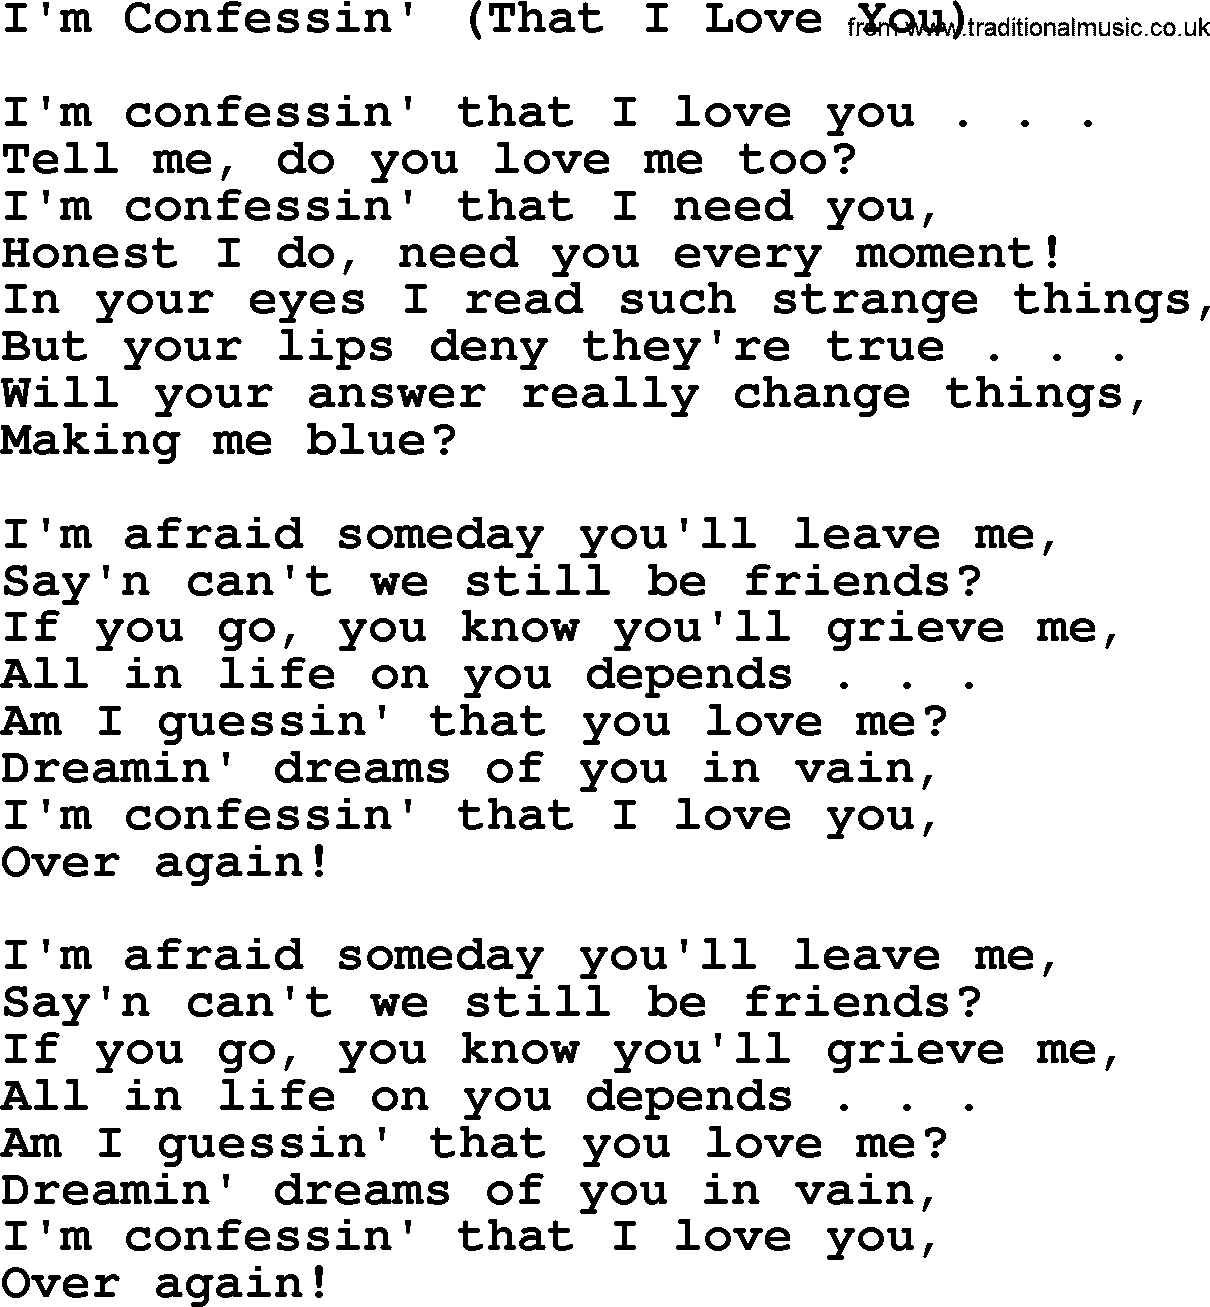 Willie Nelson song: I'm Confessin' (That I Love You) lyrics